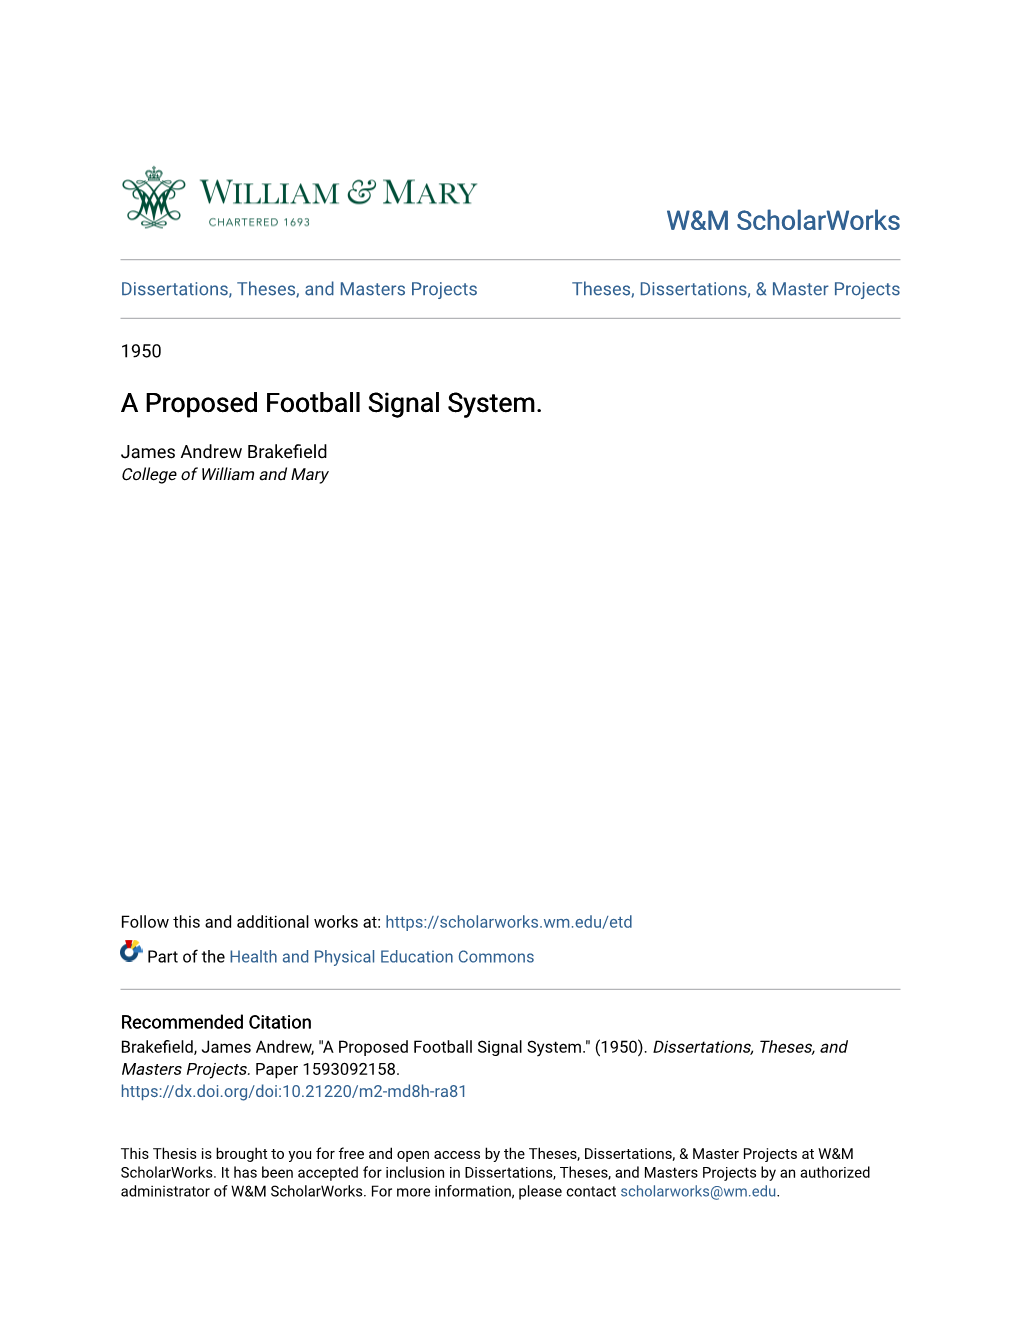 A Proposed Football Signal System